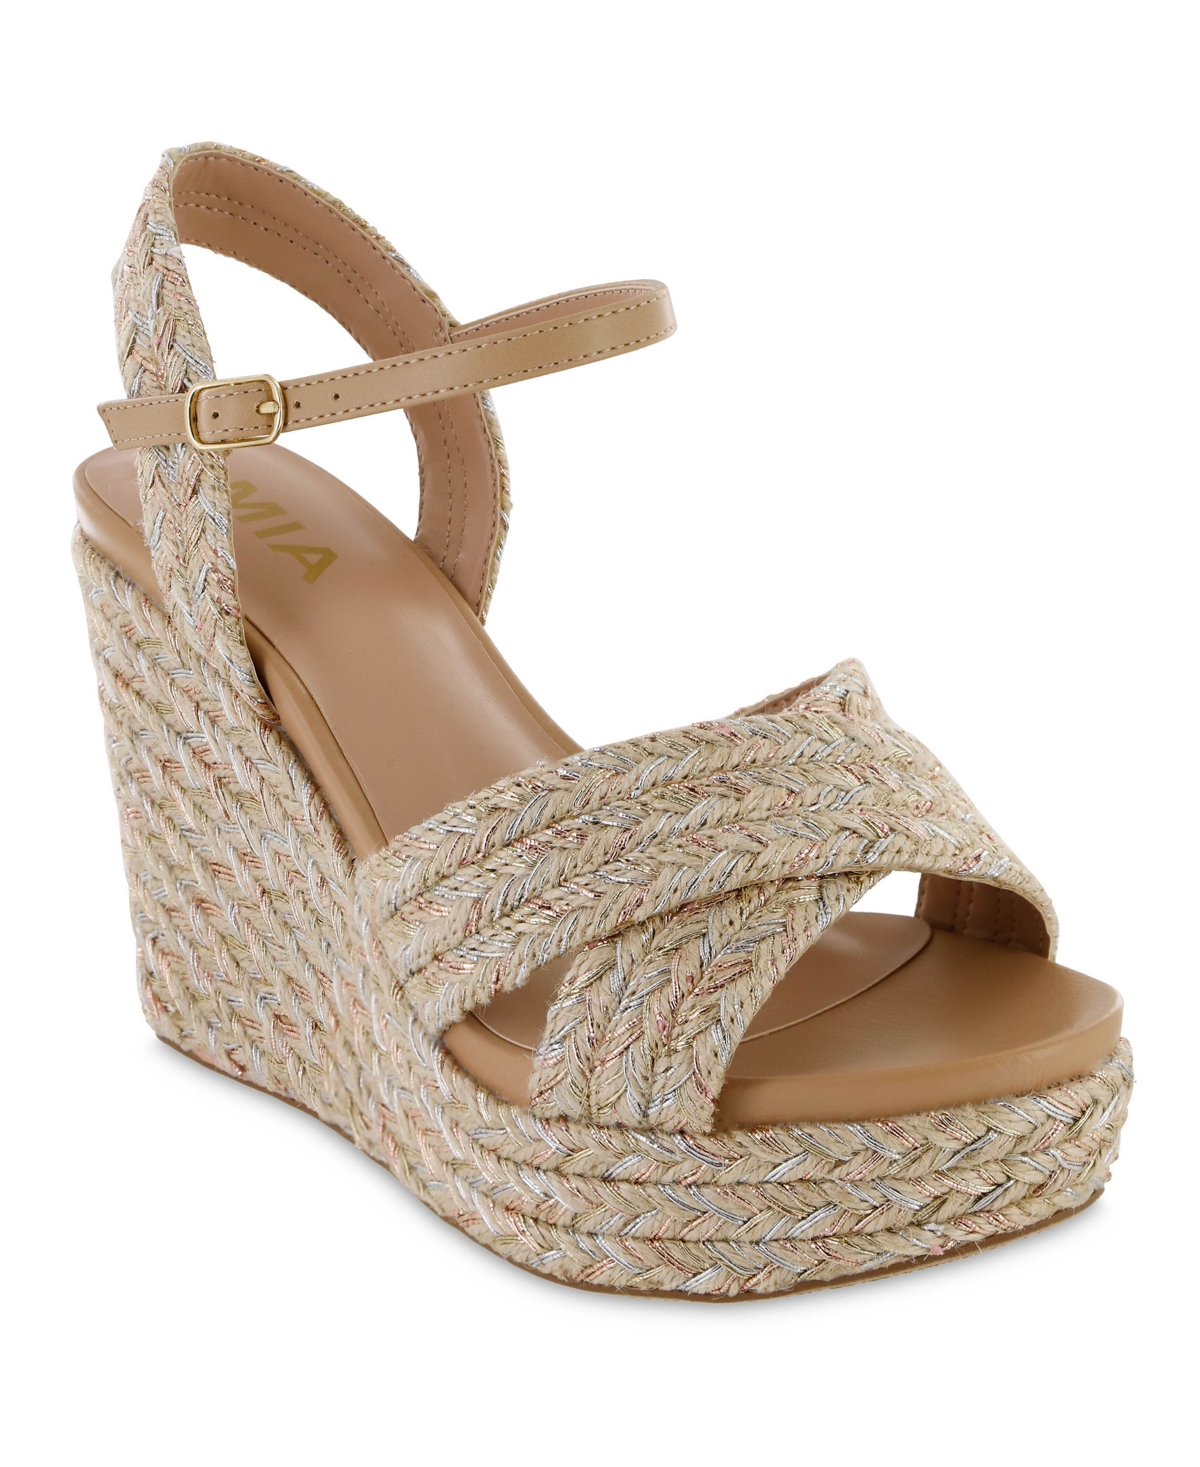 Women's Alouette Wedge Sandals - Natural